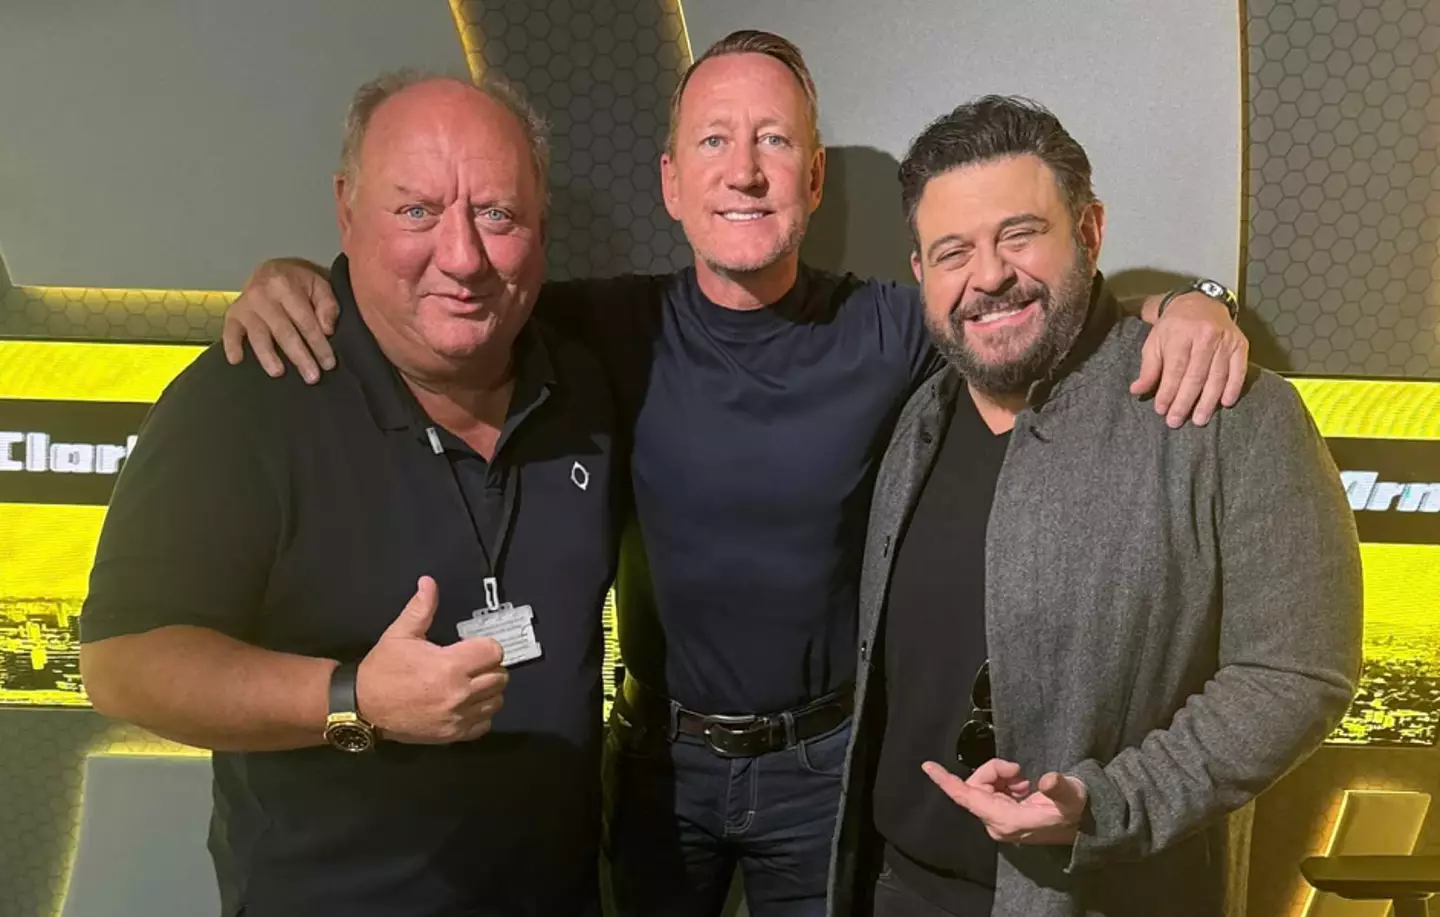 Richman pictured with former footballers Alan Brazil and Ray Parlor.